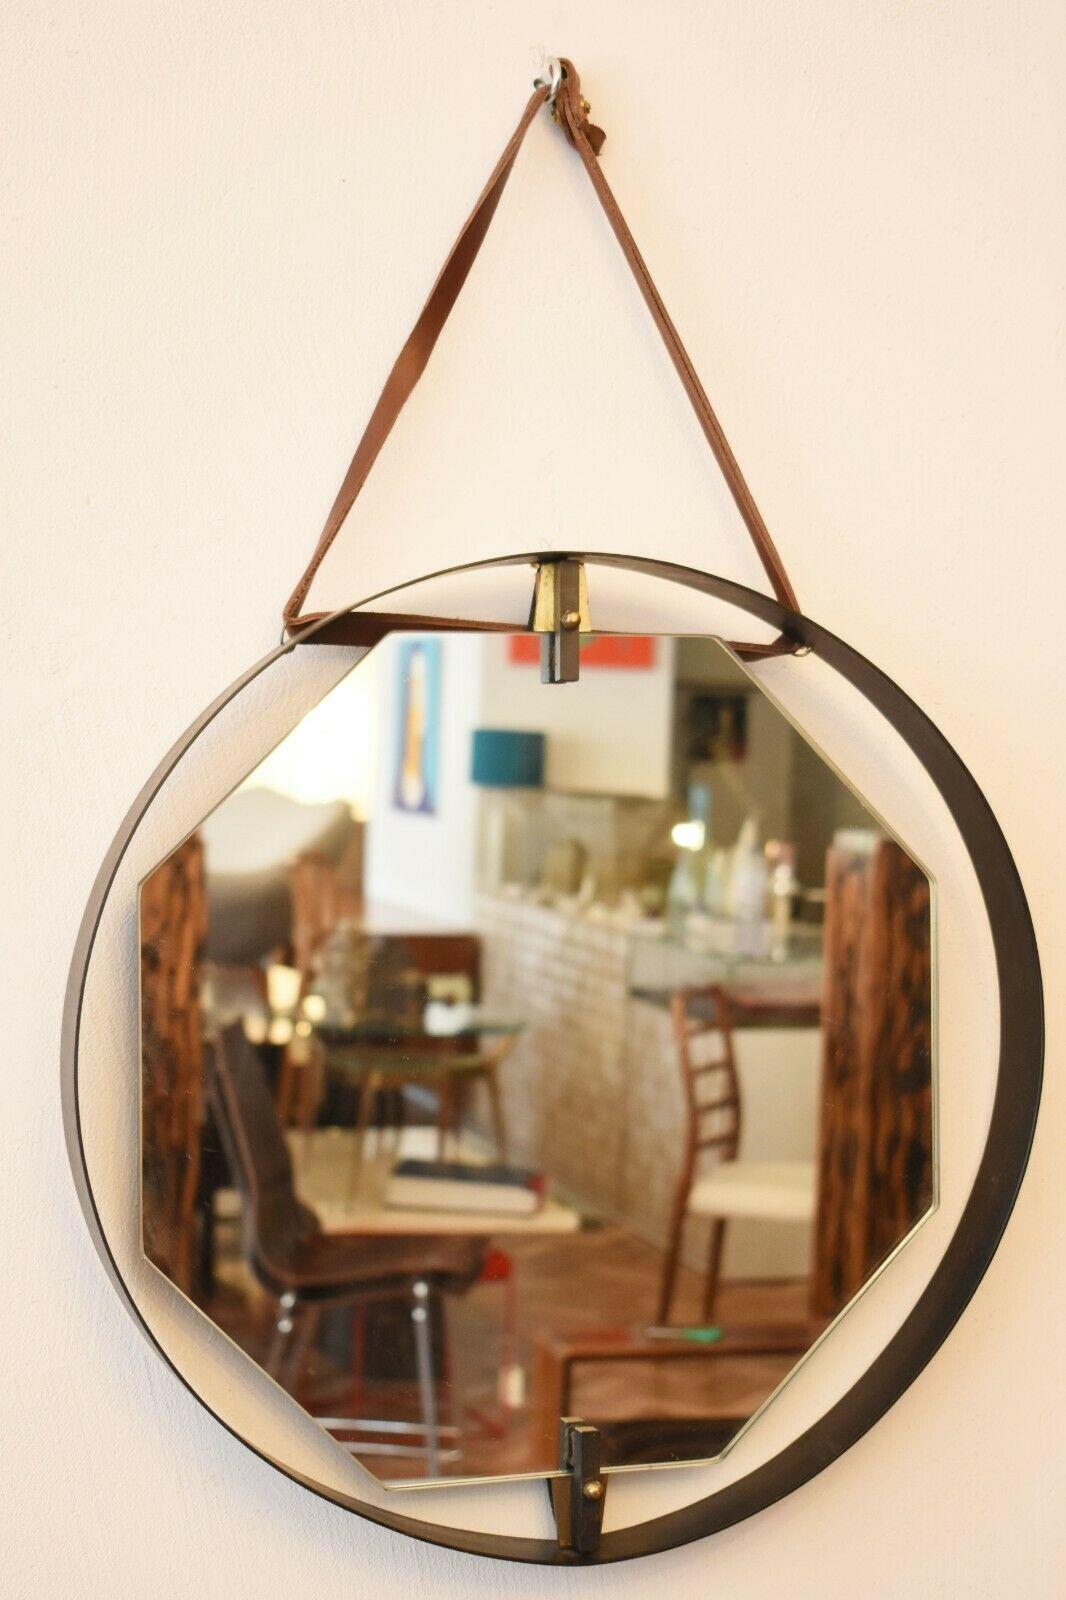 Rare and unusual Italian hexagonal mirror with circular brass frame, suspended by a leather strap.